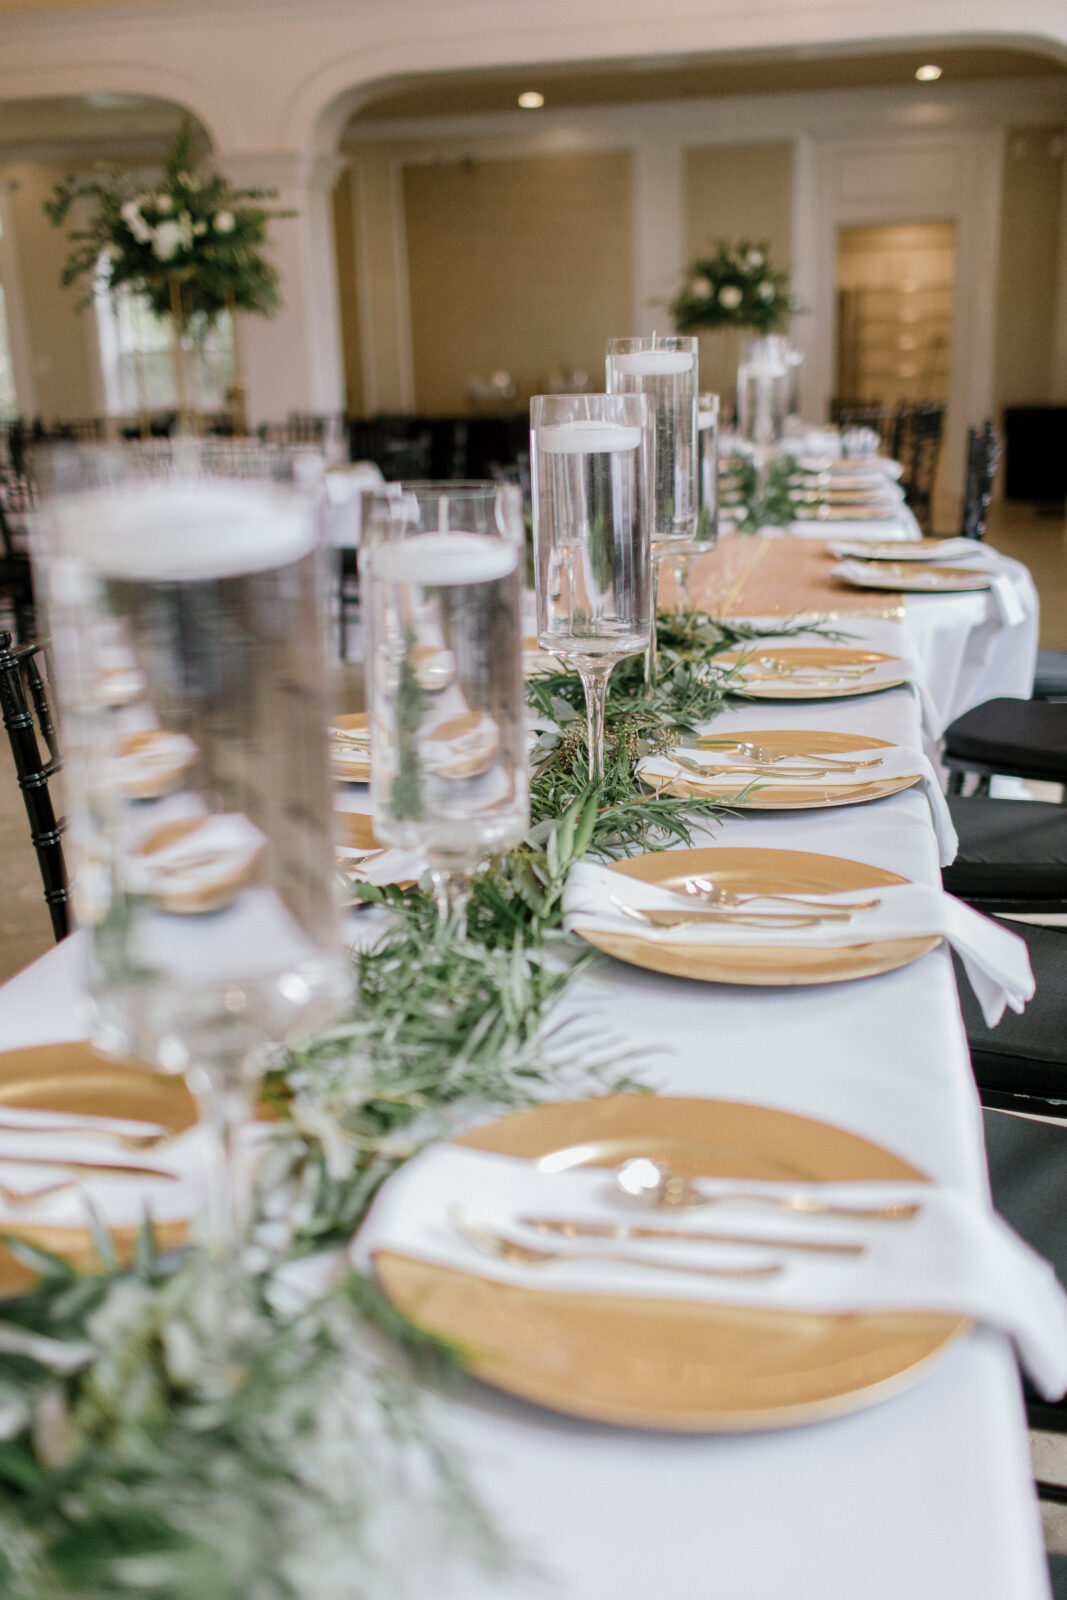 glass vases with white floating candles and golden chargers with white napkins